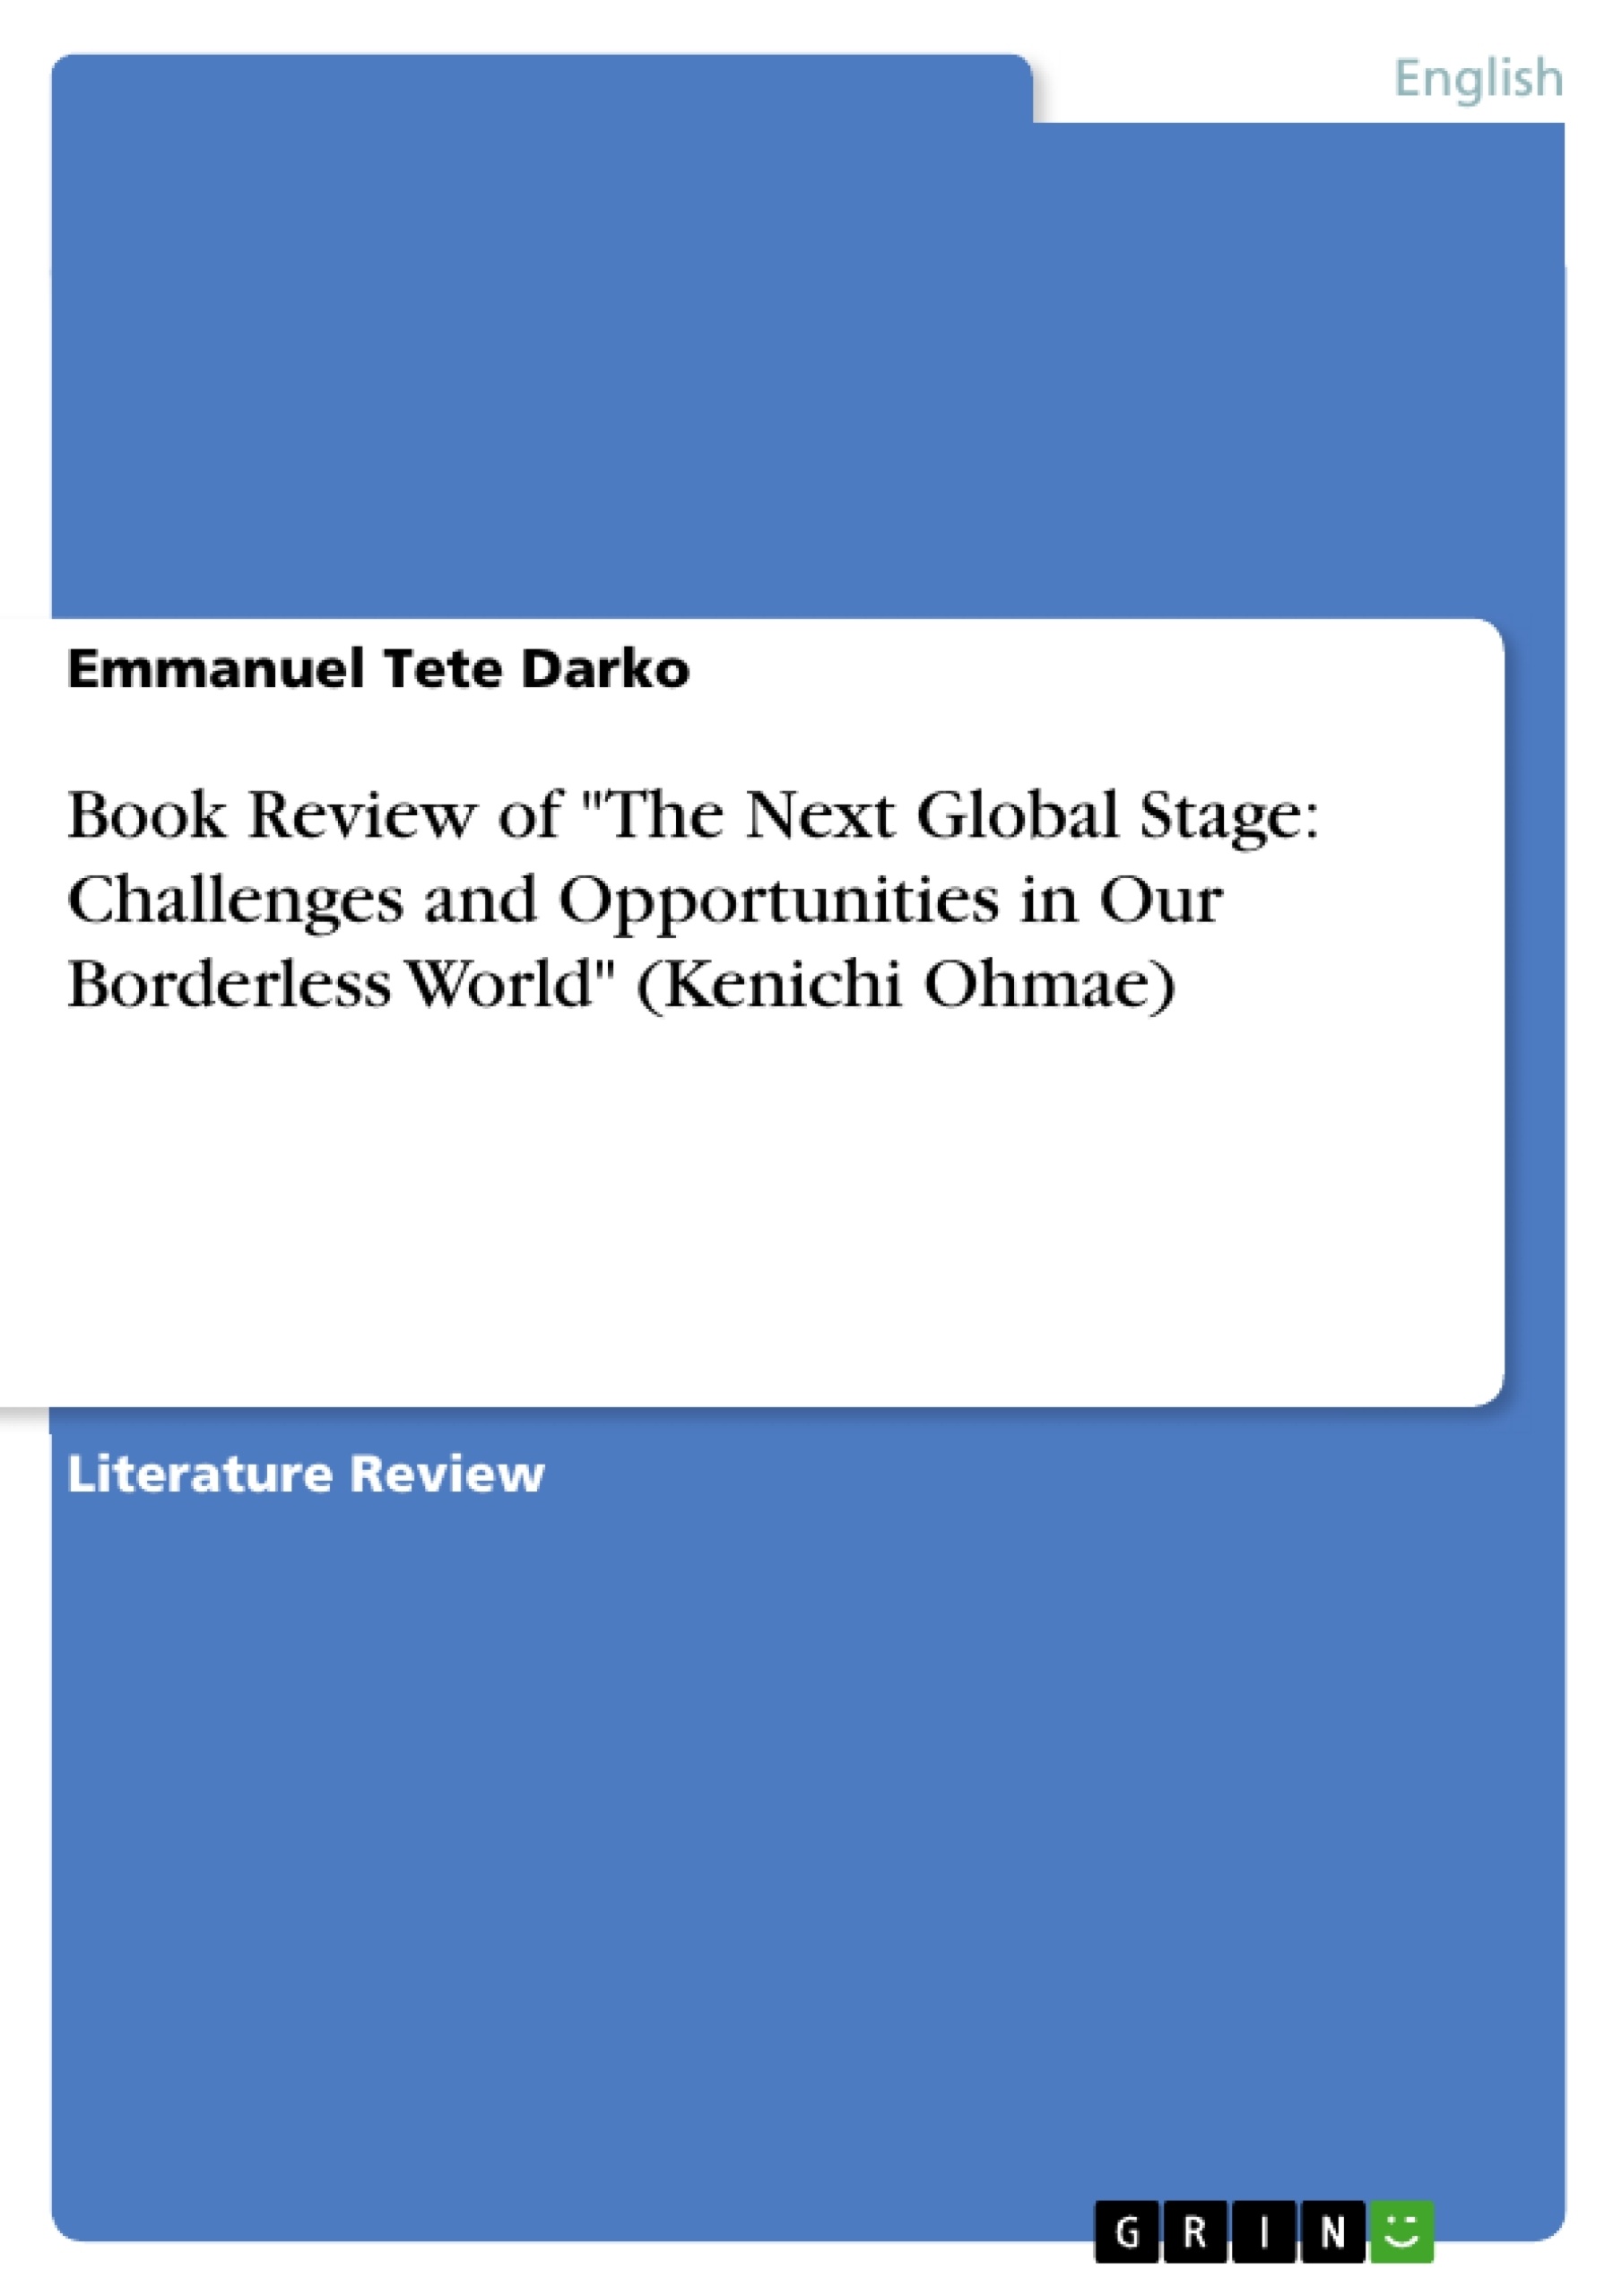 Title: Book Review of "The Next Global Stage: Challenges and Opportunities in Our Borderless World" (Kenichi Ohmae)